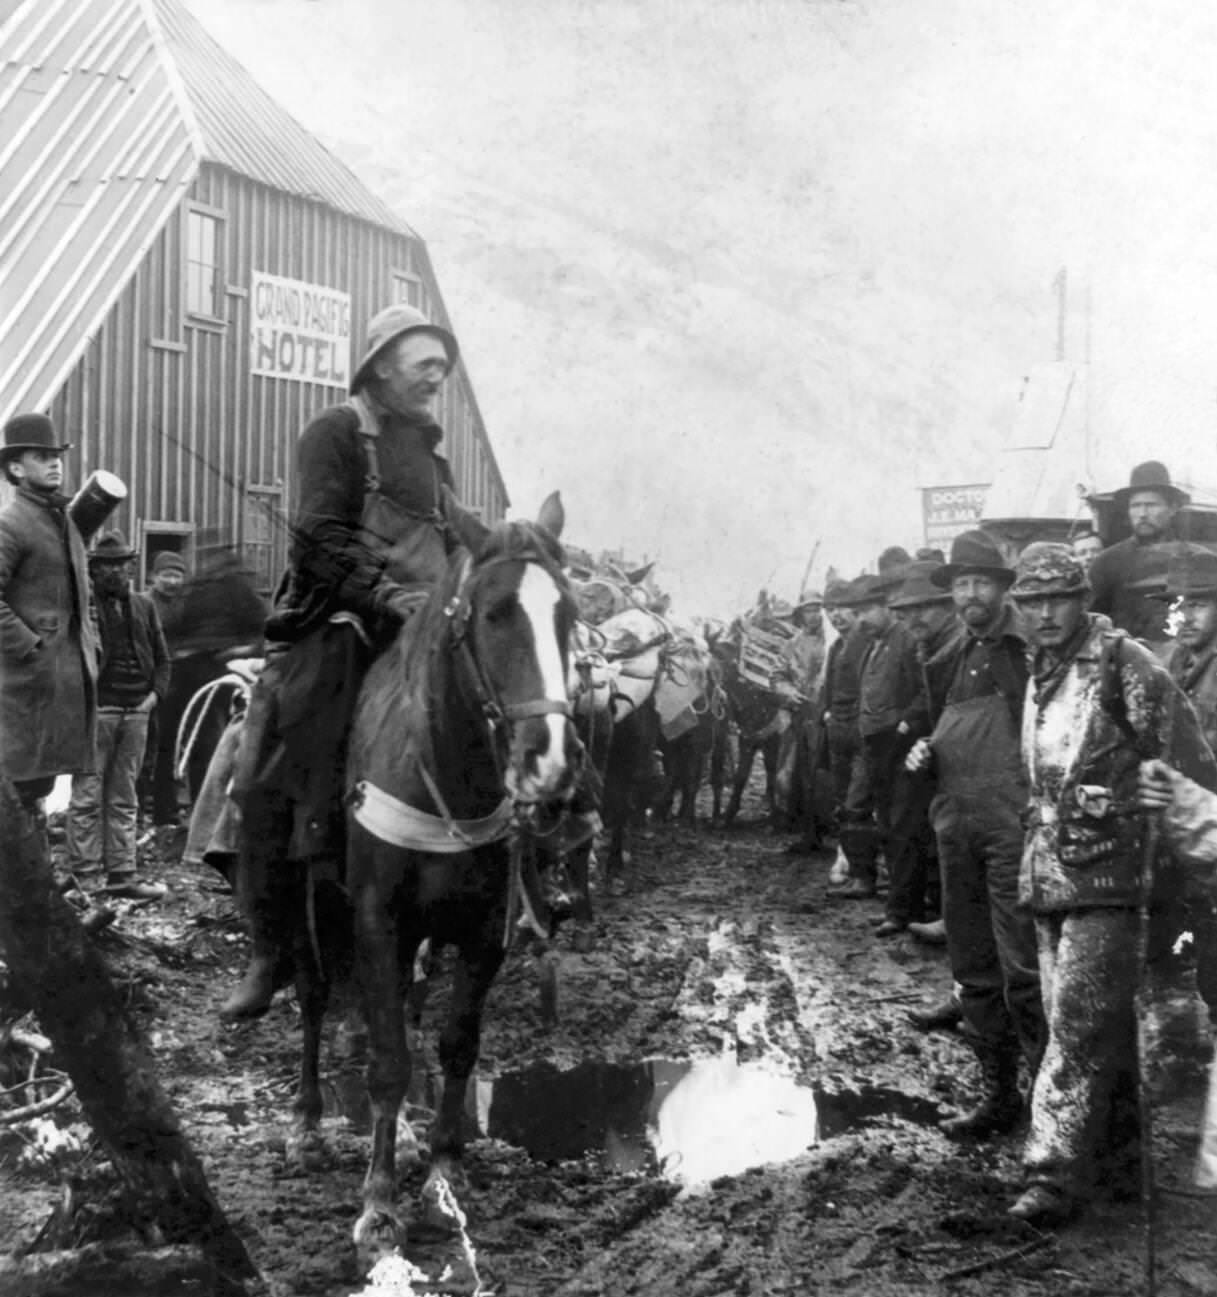 Gold prospectors in front of the Grand Pacific Hotel at Sheep Camp, Alaska, circa 1898.